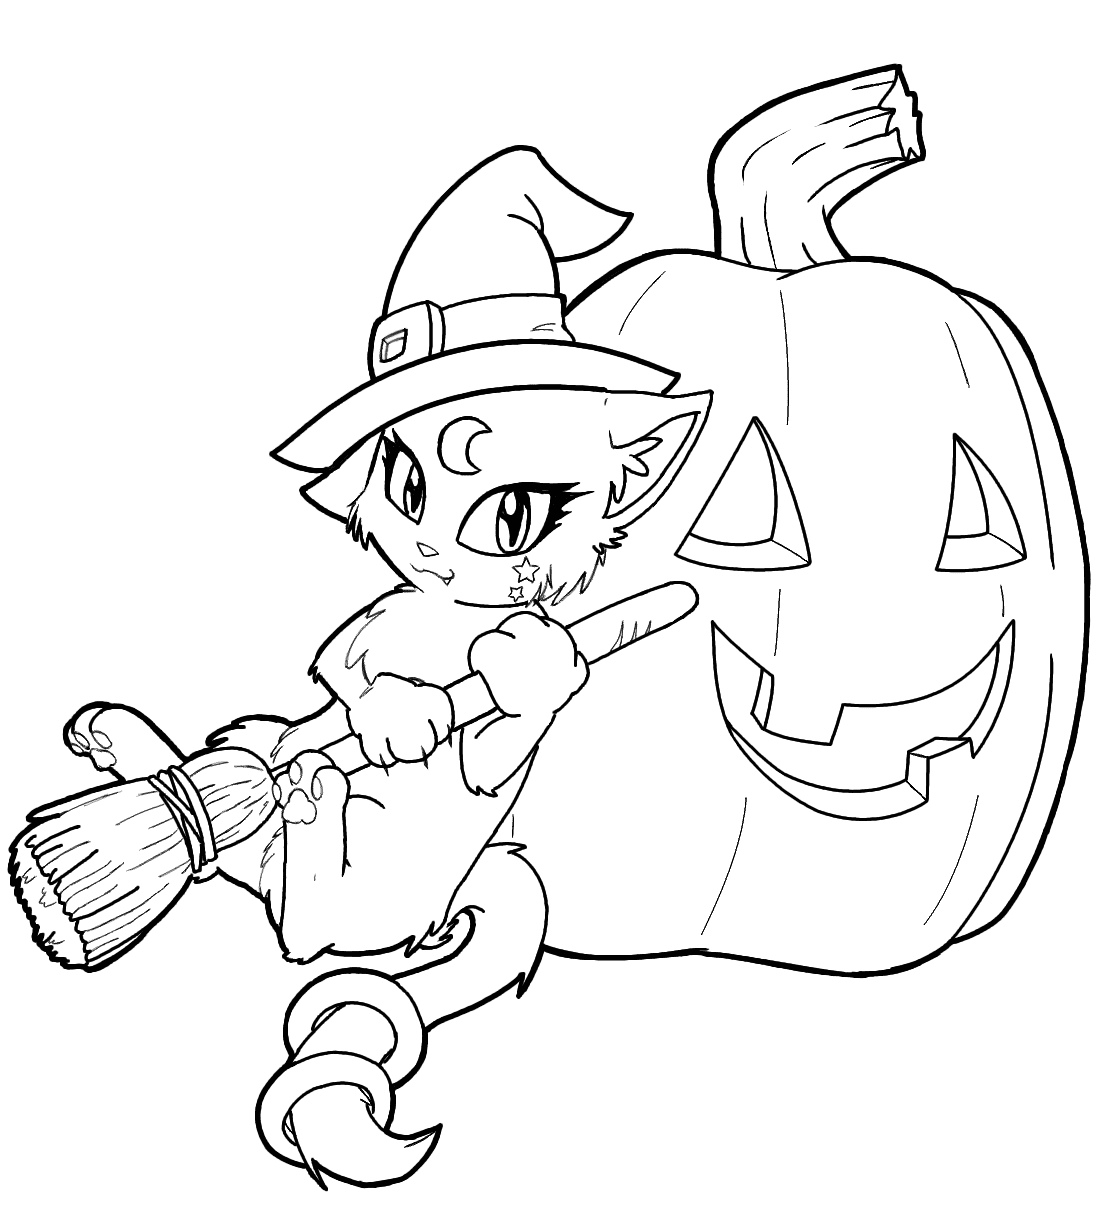 Free Witch Image For Kids Coloring Page